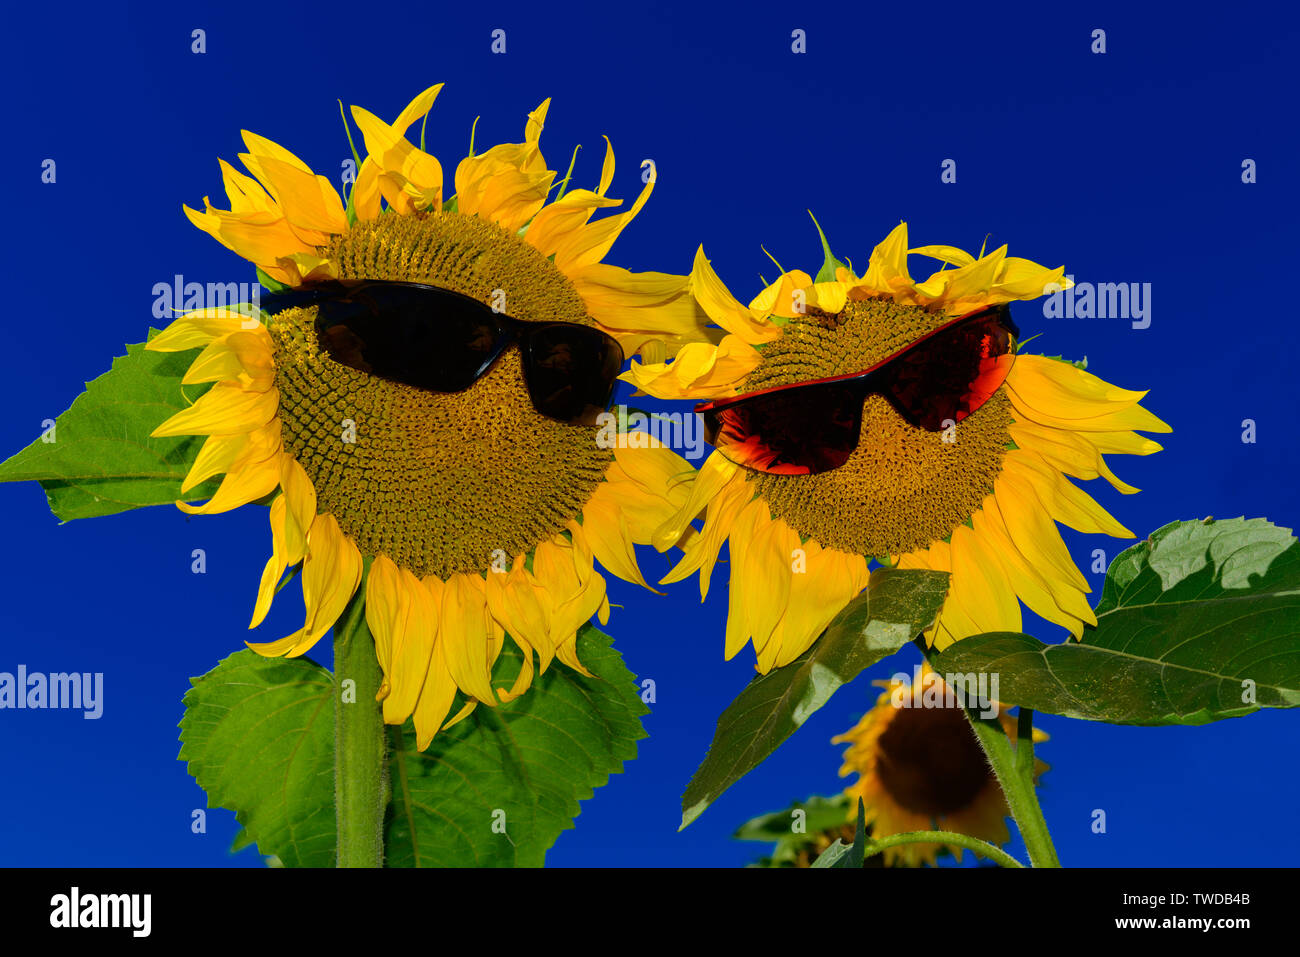 Pair of funny sunflowers wearing sunglasses against deep blue sky Stock Photo